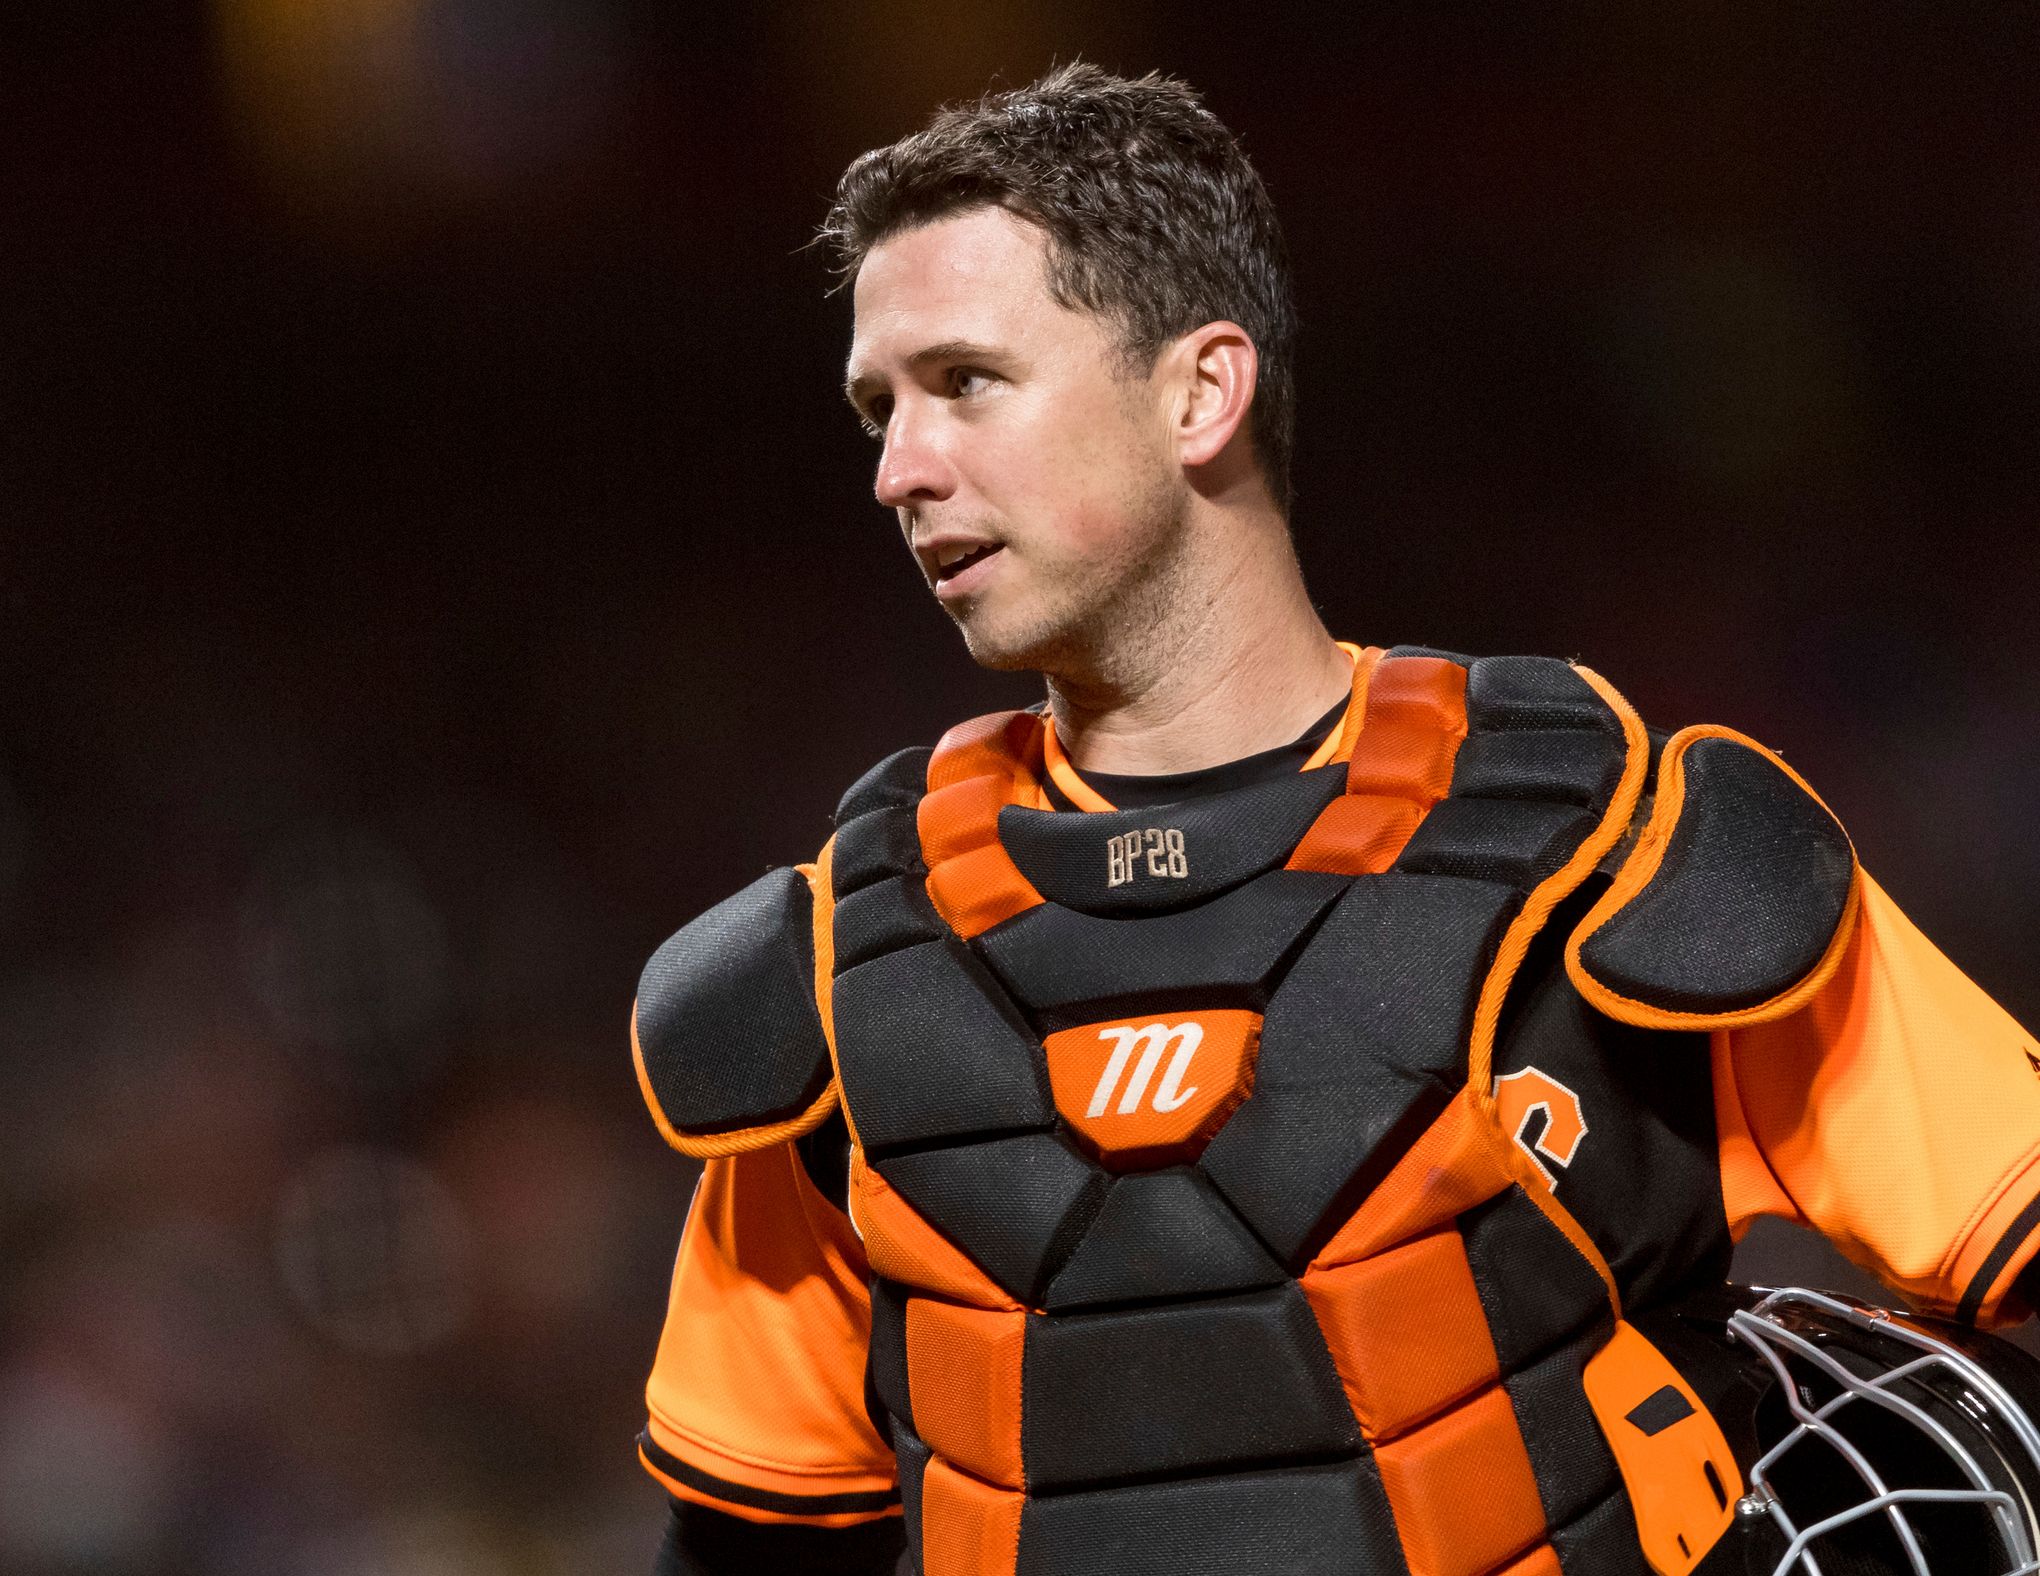 Giants' Buster Posey hopes to rediscover power hitting